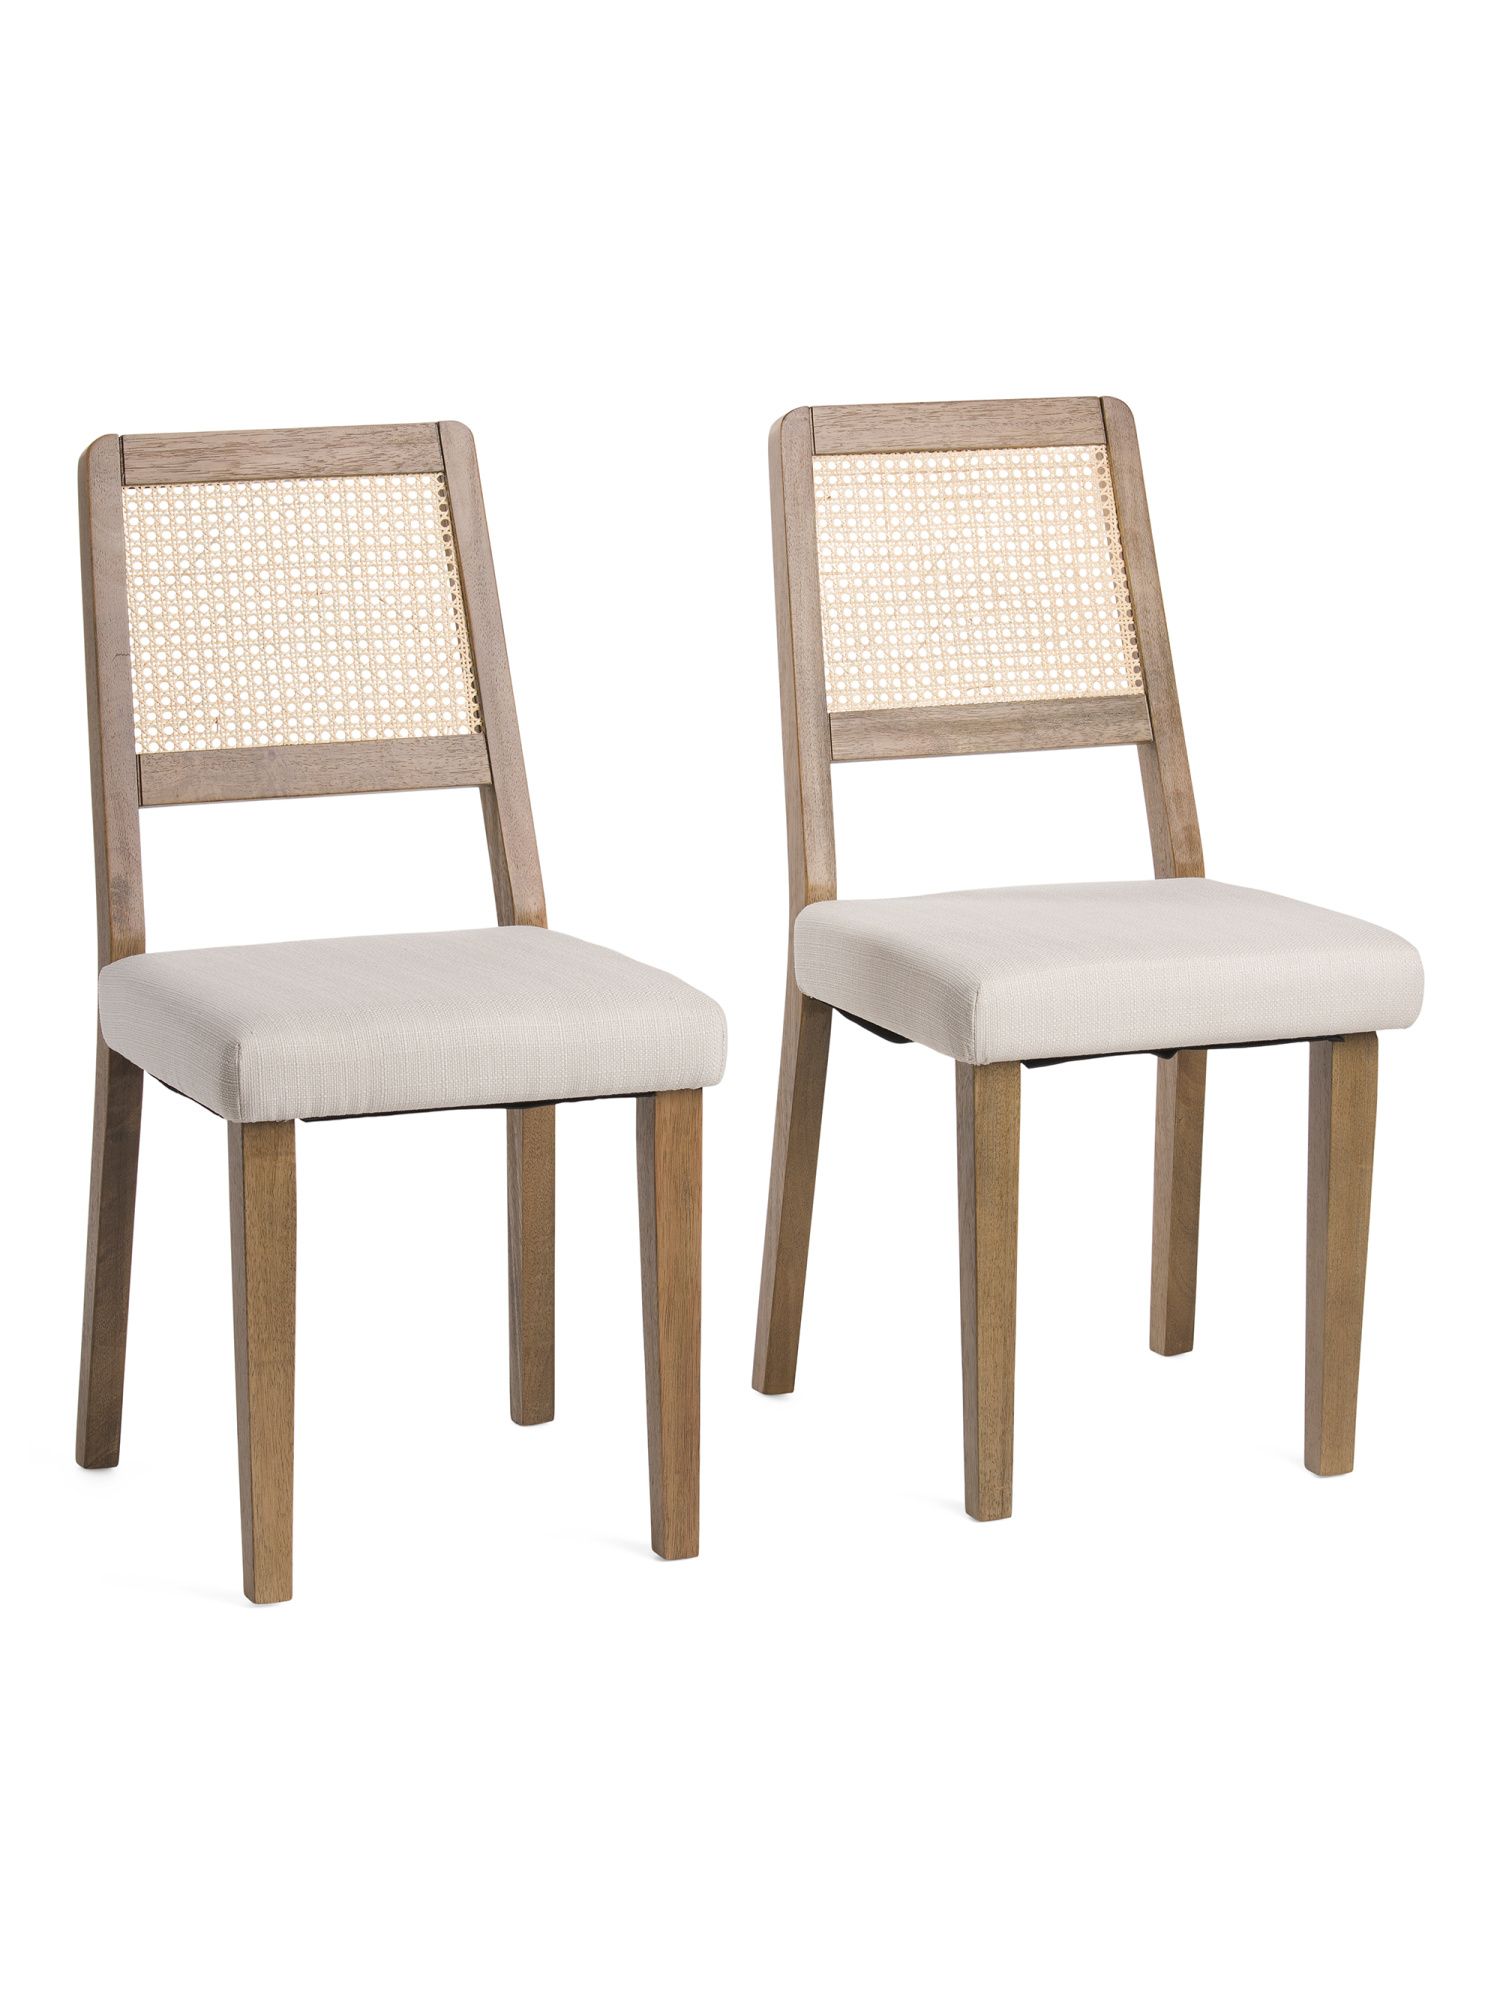 Set Of 2 Archie Cane Back Dining Chairs | TJ Maxx